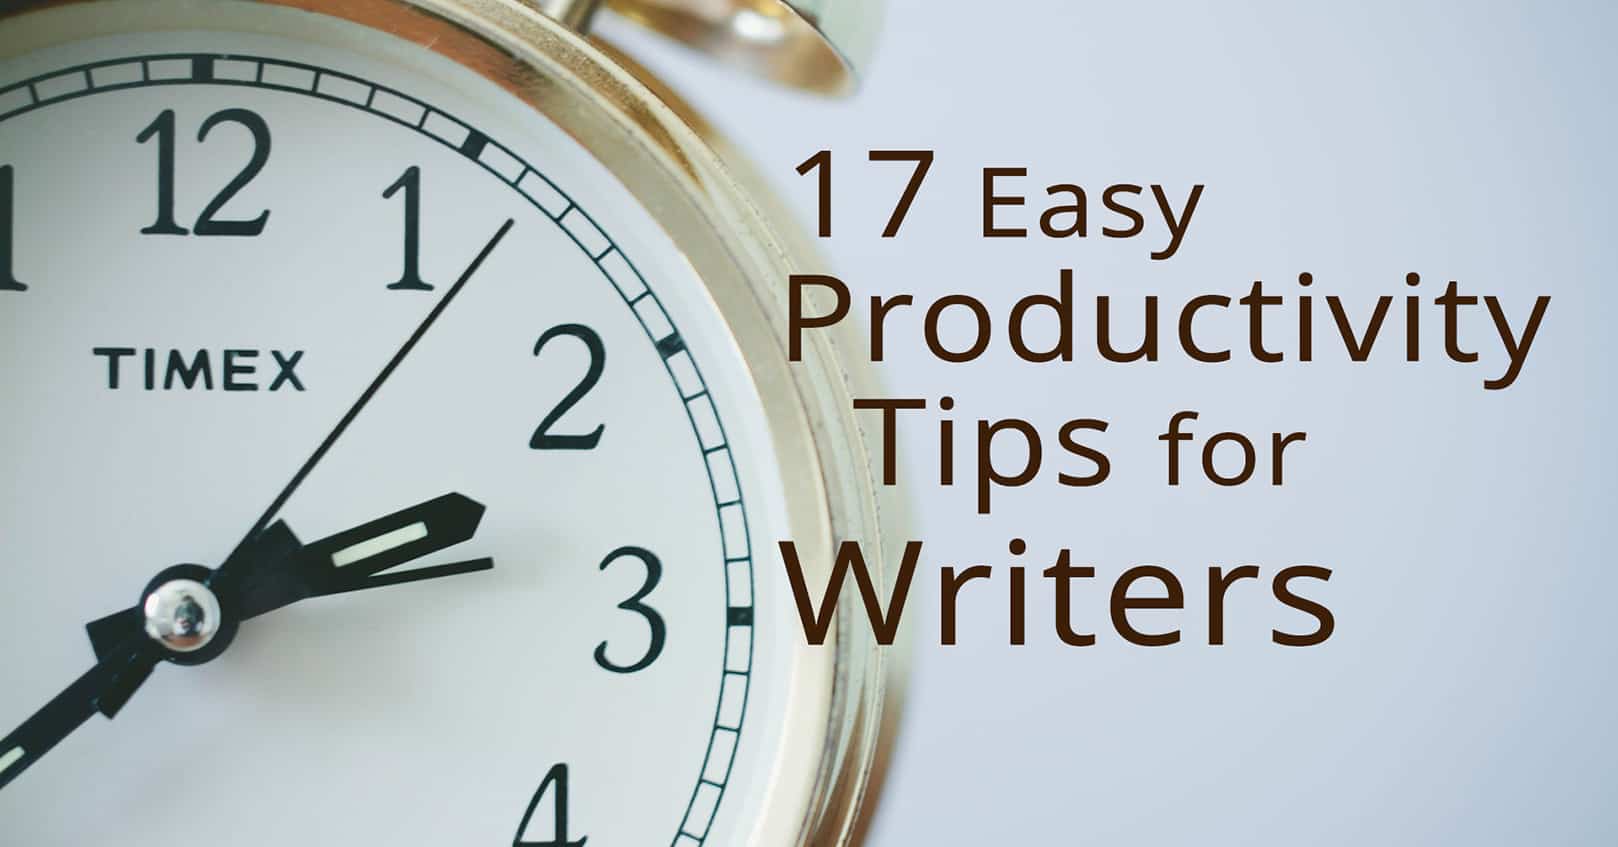 Productivity tips for writers